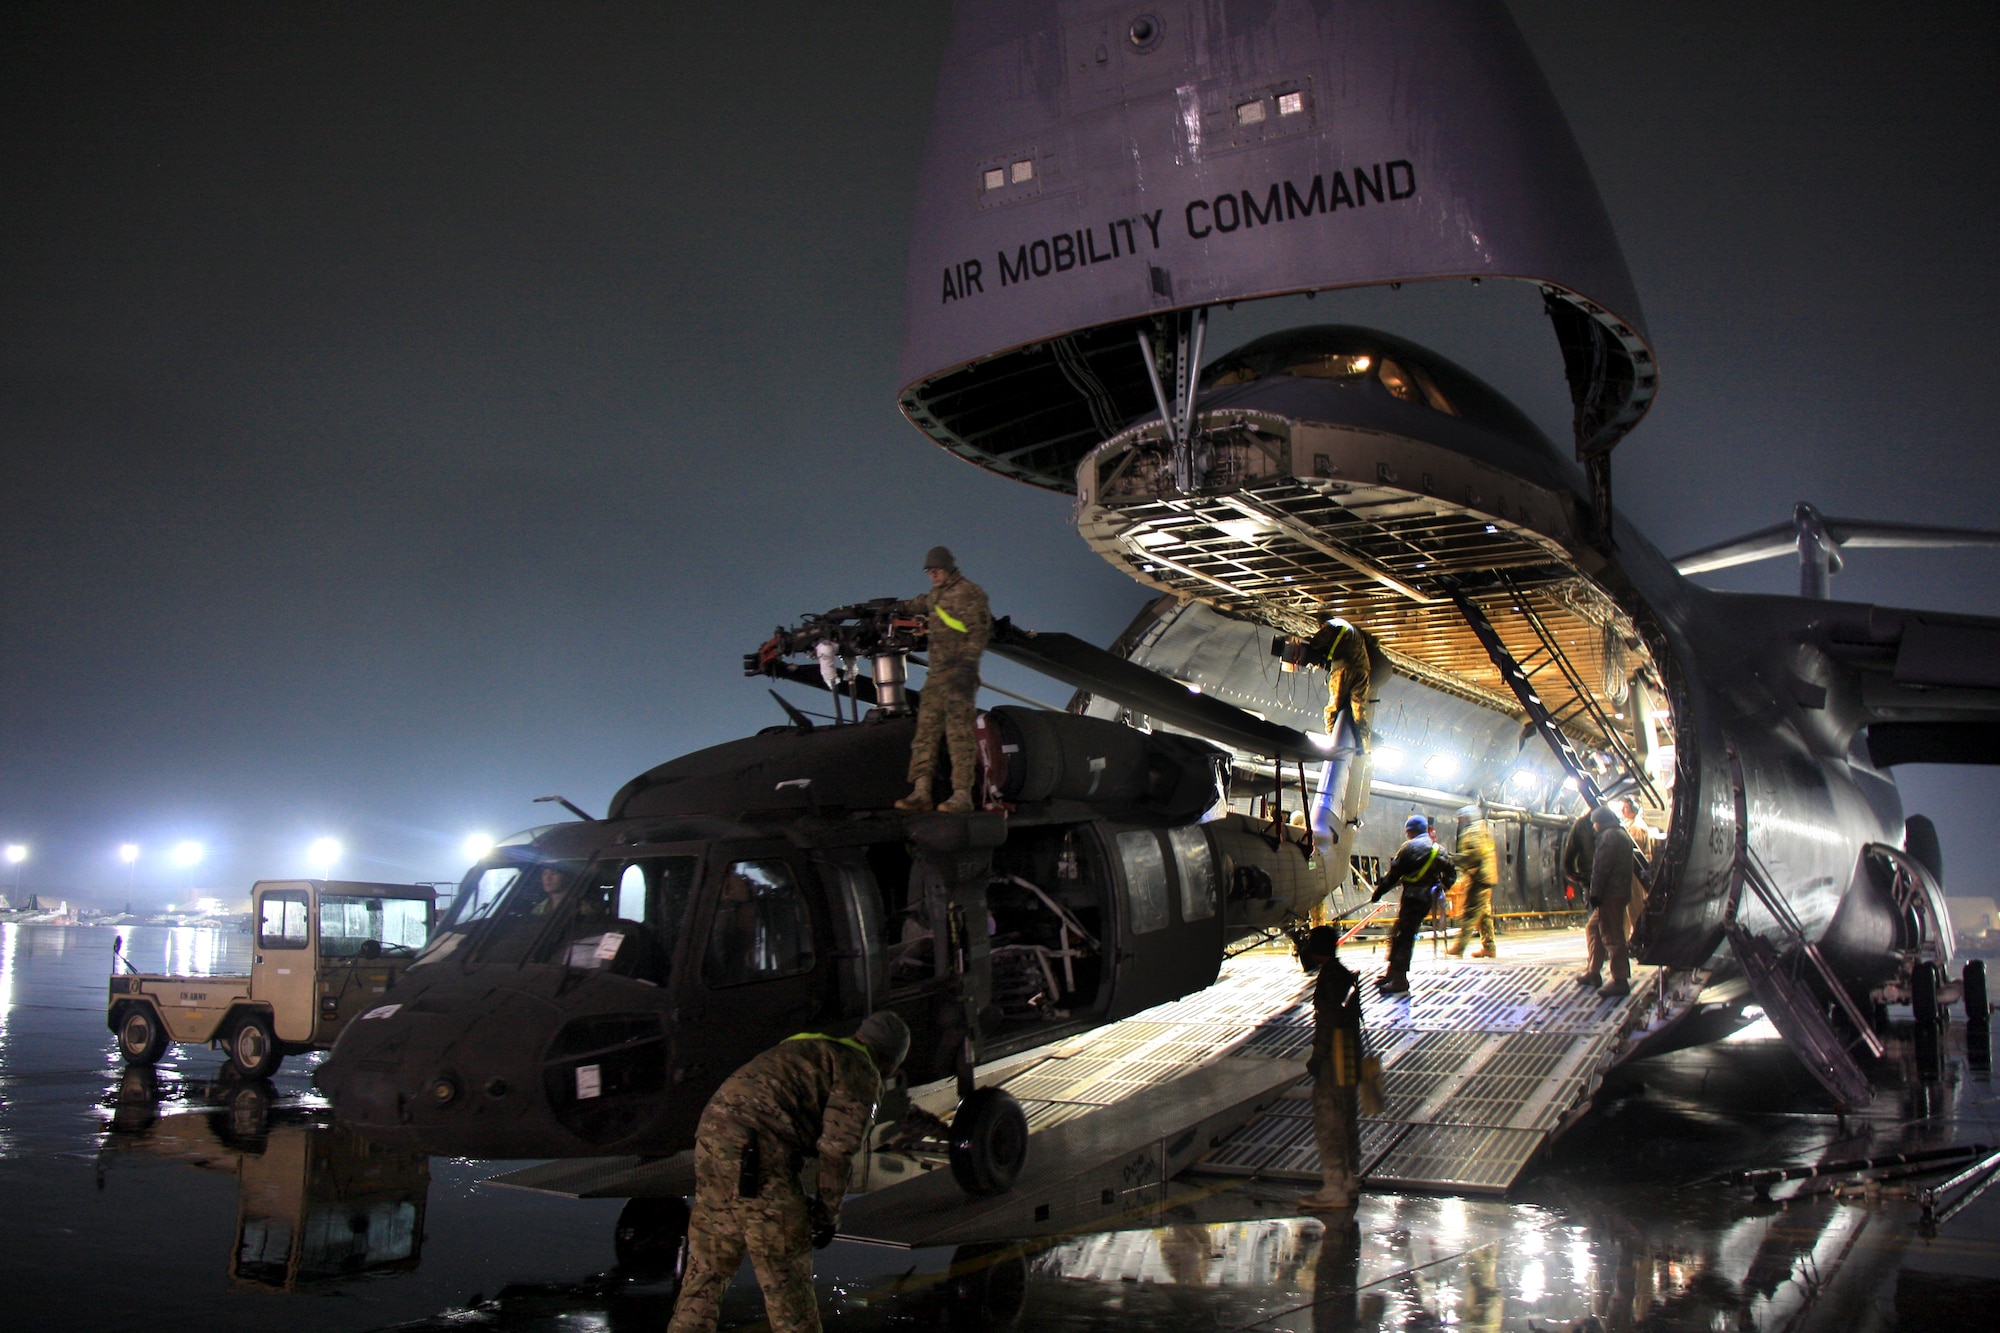 Soldiers and Airmen offload a UH-64 Black Hawk helicopter from a C-5M Super Galaxy at Bagram Air Field. The C-5M Super Galaxy has served the U.S. Air Force since 1969, and continues to provide vital heavy air lift to troops worldwide. (U.S. Army photo/1st Lt. Henry Chan, 18th Combat Sustainment Support Battalion Public Affairs)